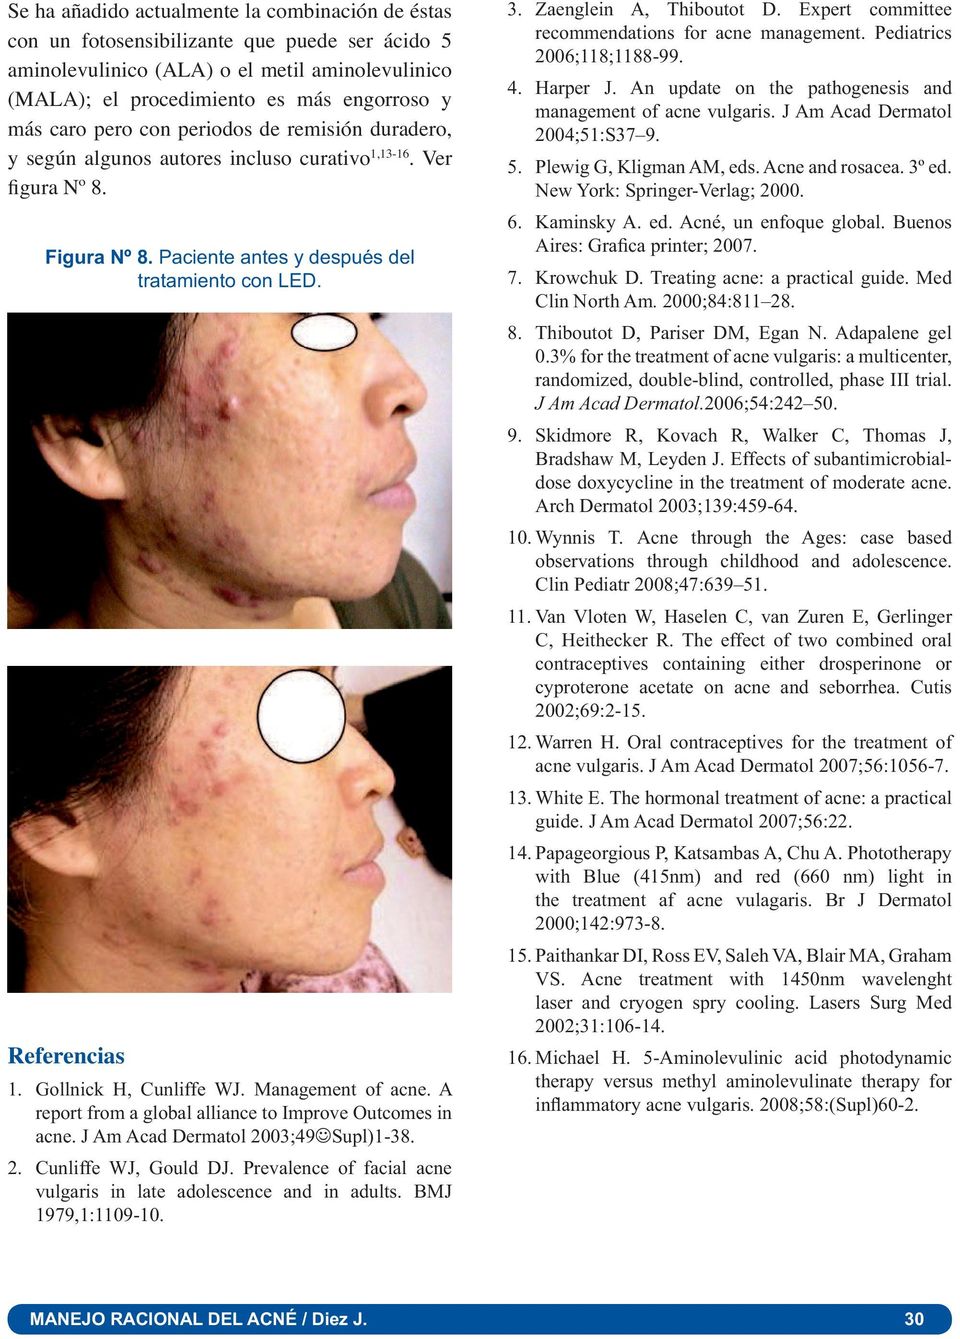 Gollnick H, Cunliffe WJ. Management of acne. A report from a global alliance to Improve Outcomes in acne. J Am Acad Dermatol 2003;49 Supl)1-38. 2. Cunliffe WJ, Gould DJ.